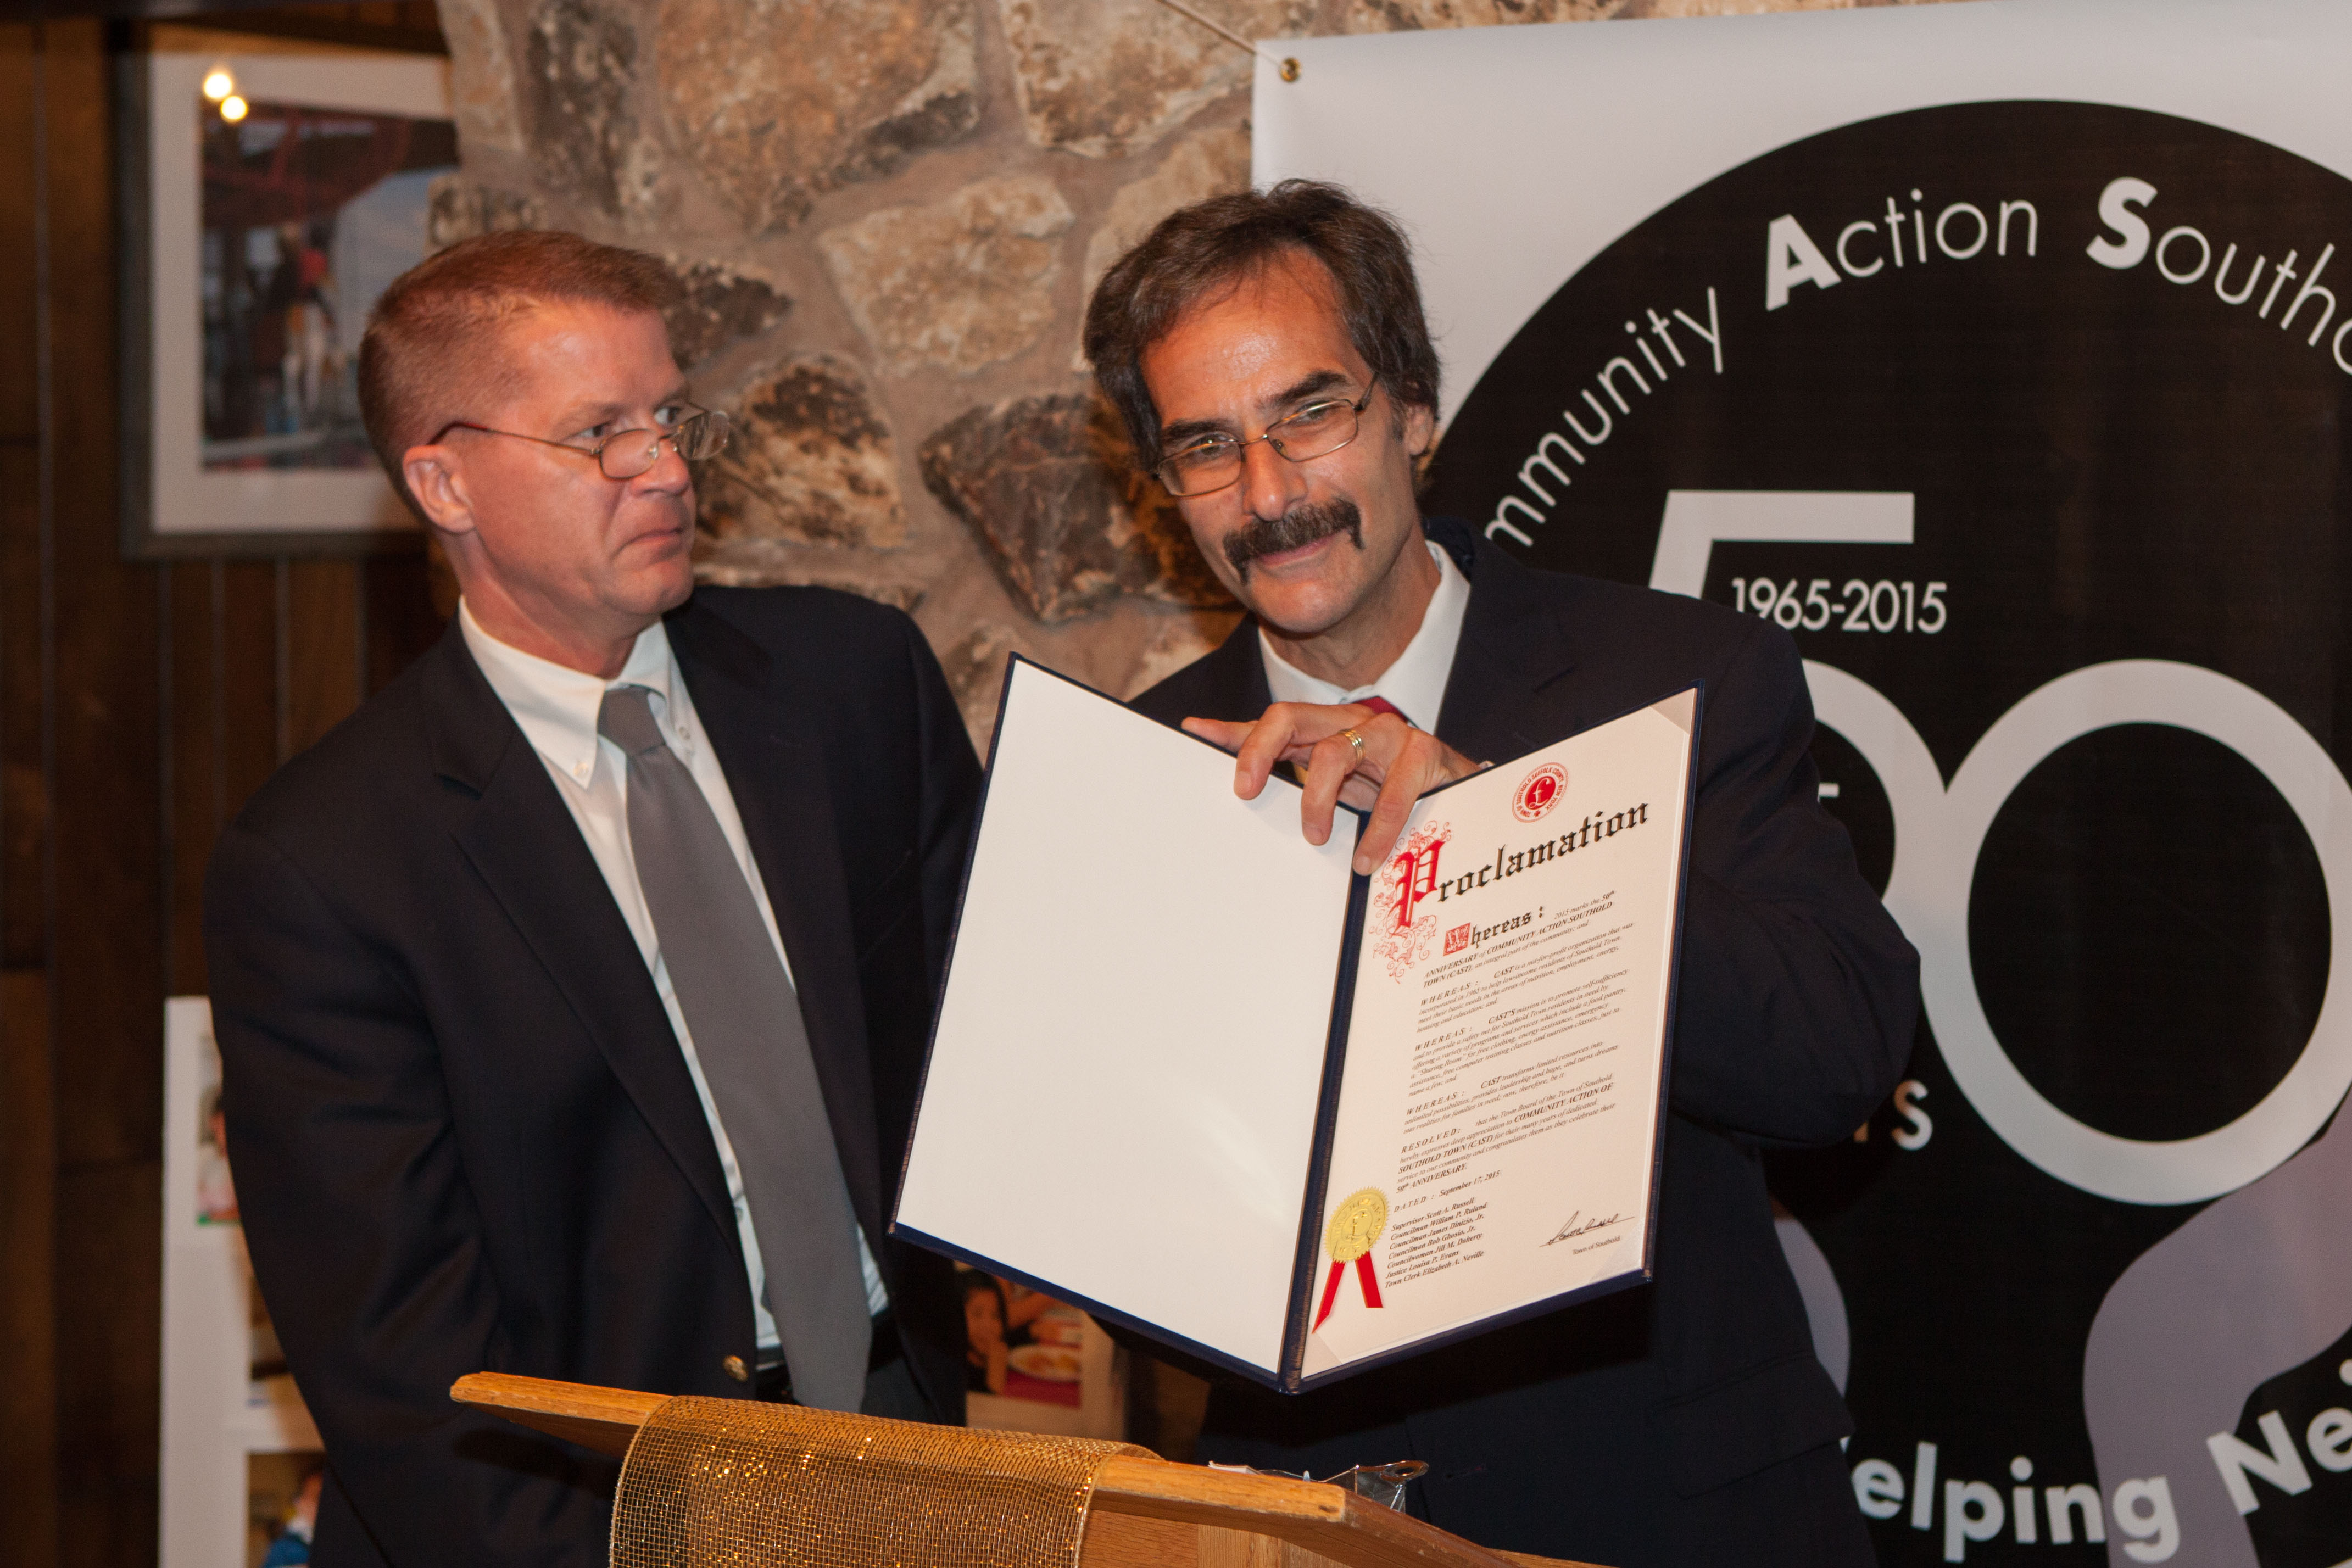 Scott Russell presents Denis Noncarrow with a proclamation honoring CAST's 50th anniversary.